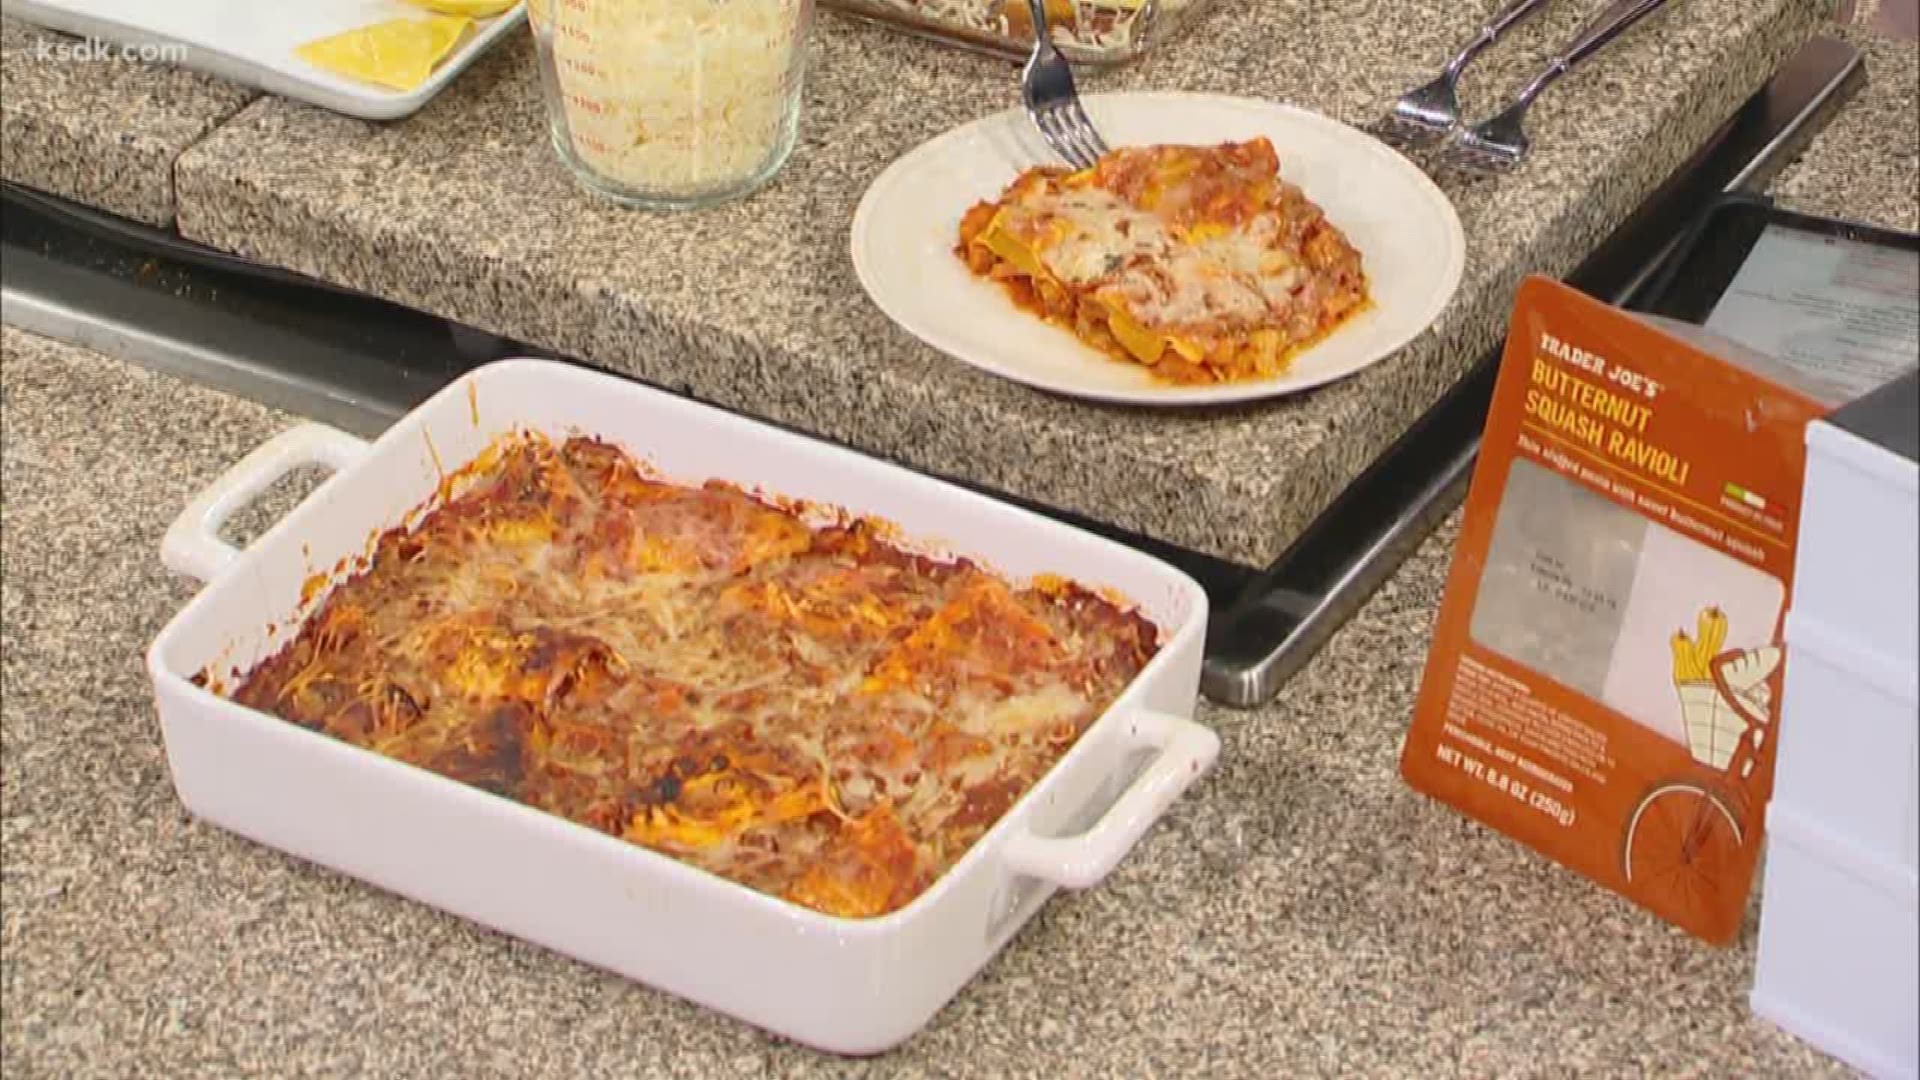 Jennifer McDaniel of McDaniel Nutrition Therapy shared a recipe for a good fall family meal!